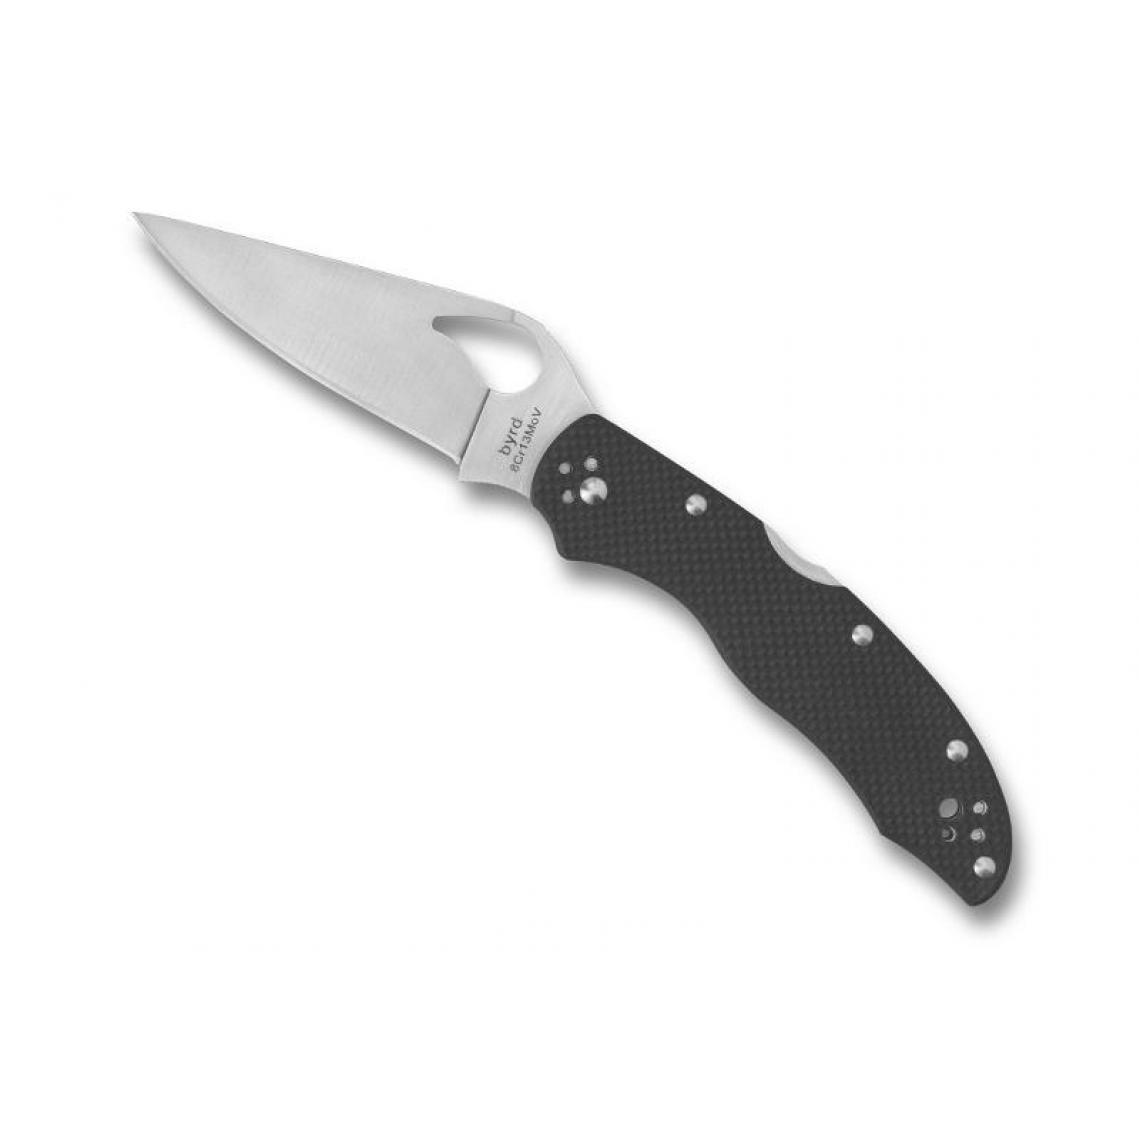 Divers Marques - BYRD KNIFE - BY01GP2 - COUTEAU BYRD HARRIER 2 - Outils de coupe